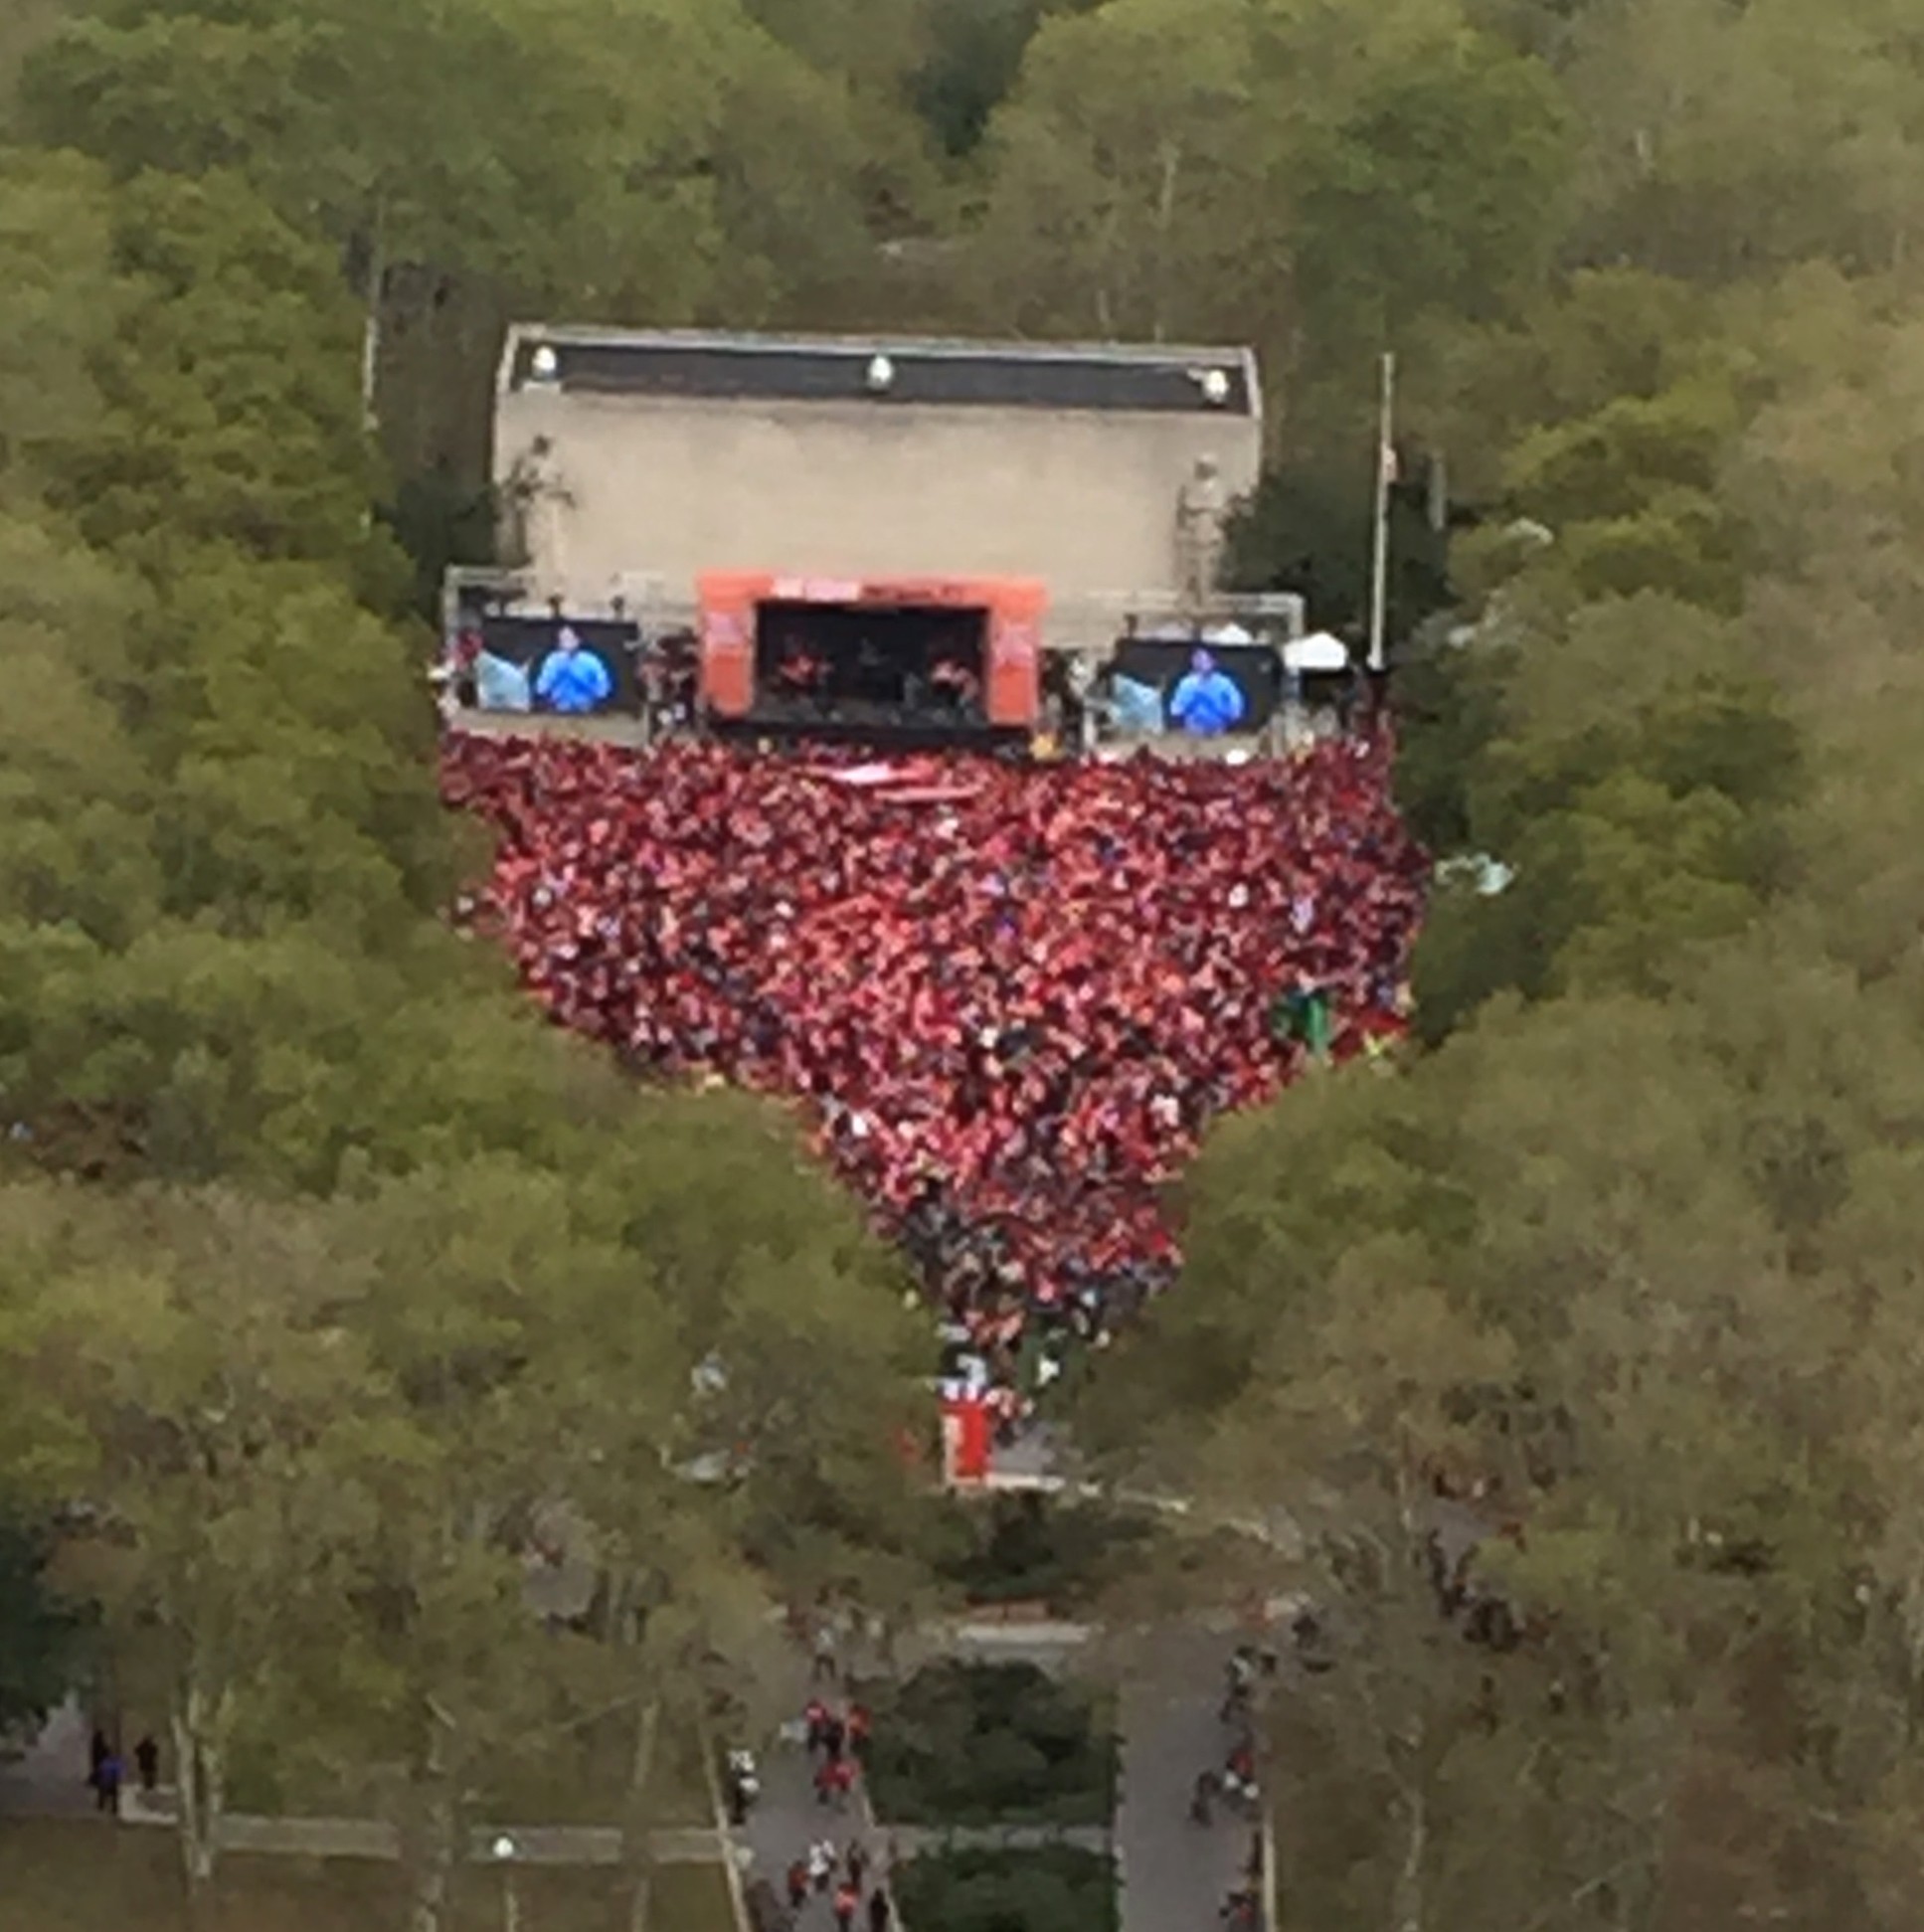 An aerial view of the rally, showing the crowd as a sea of red. Photo by Shlomo Sprung